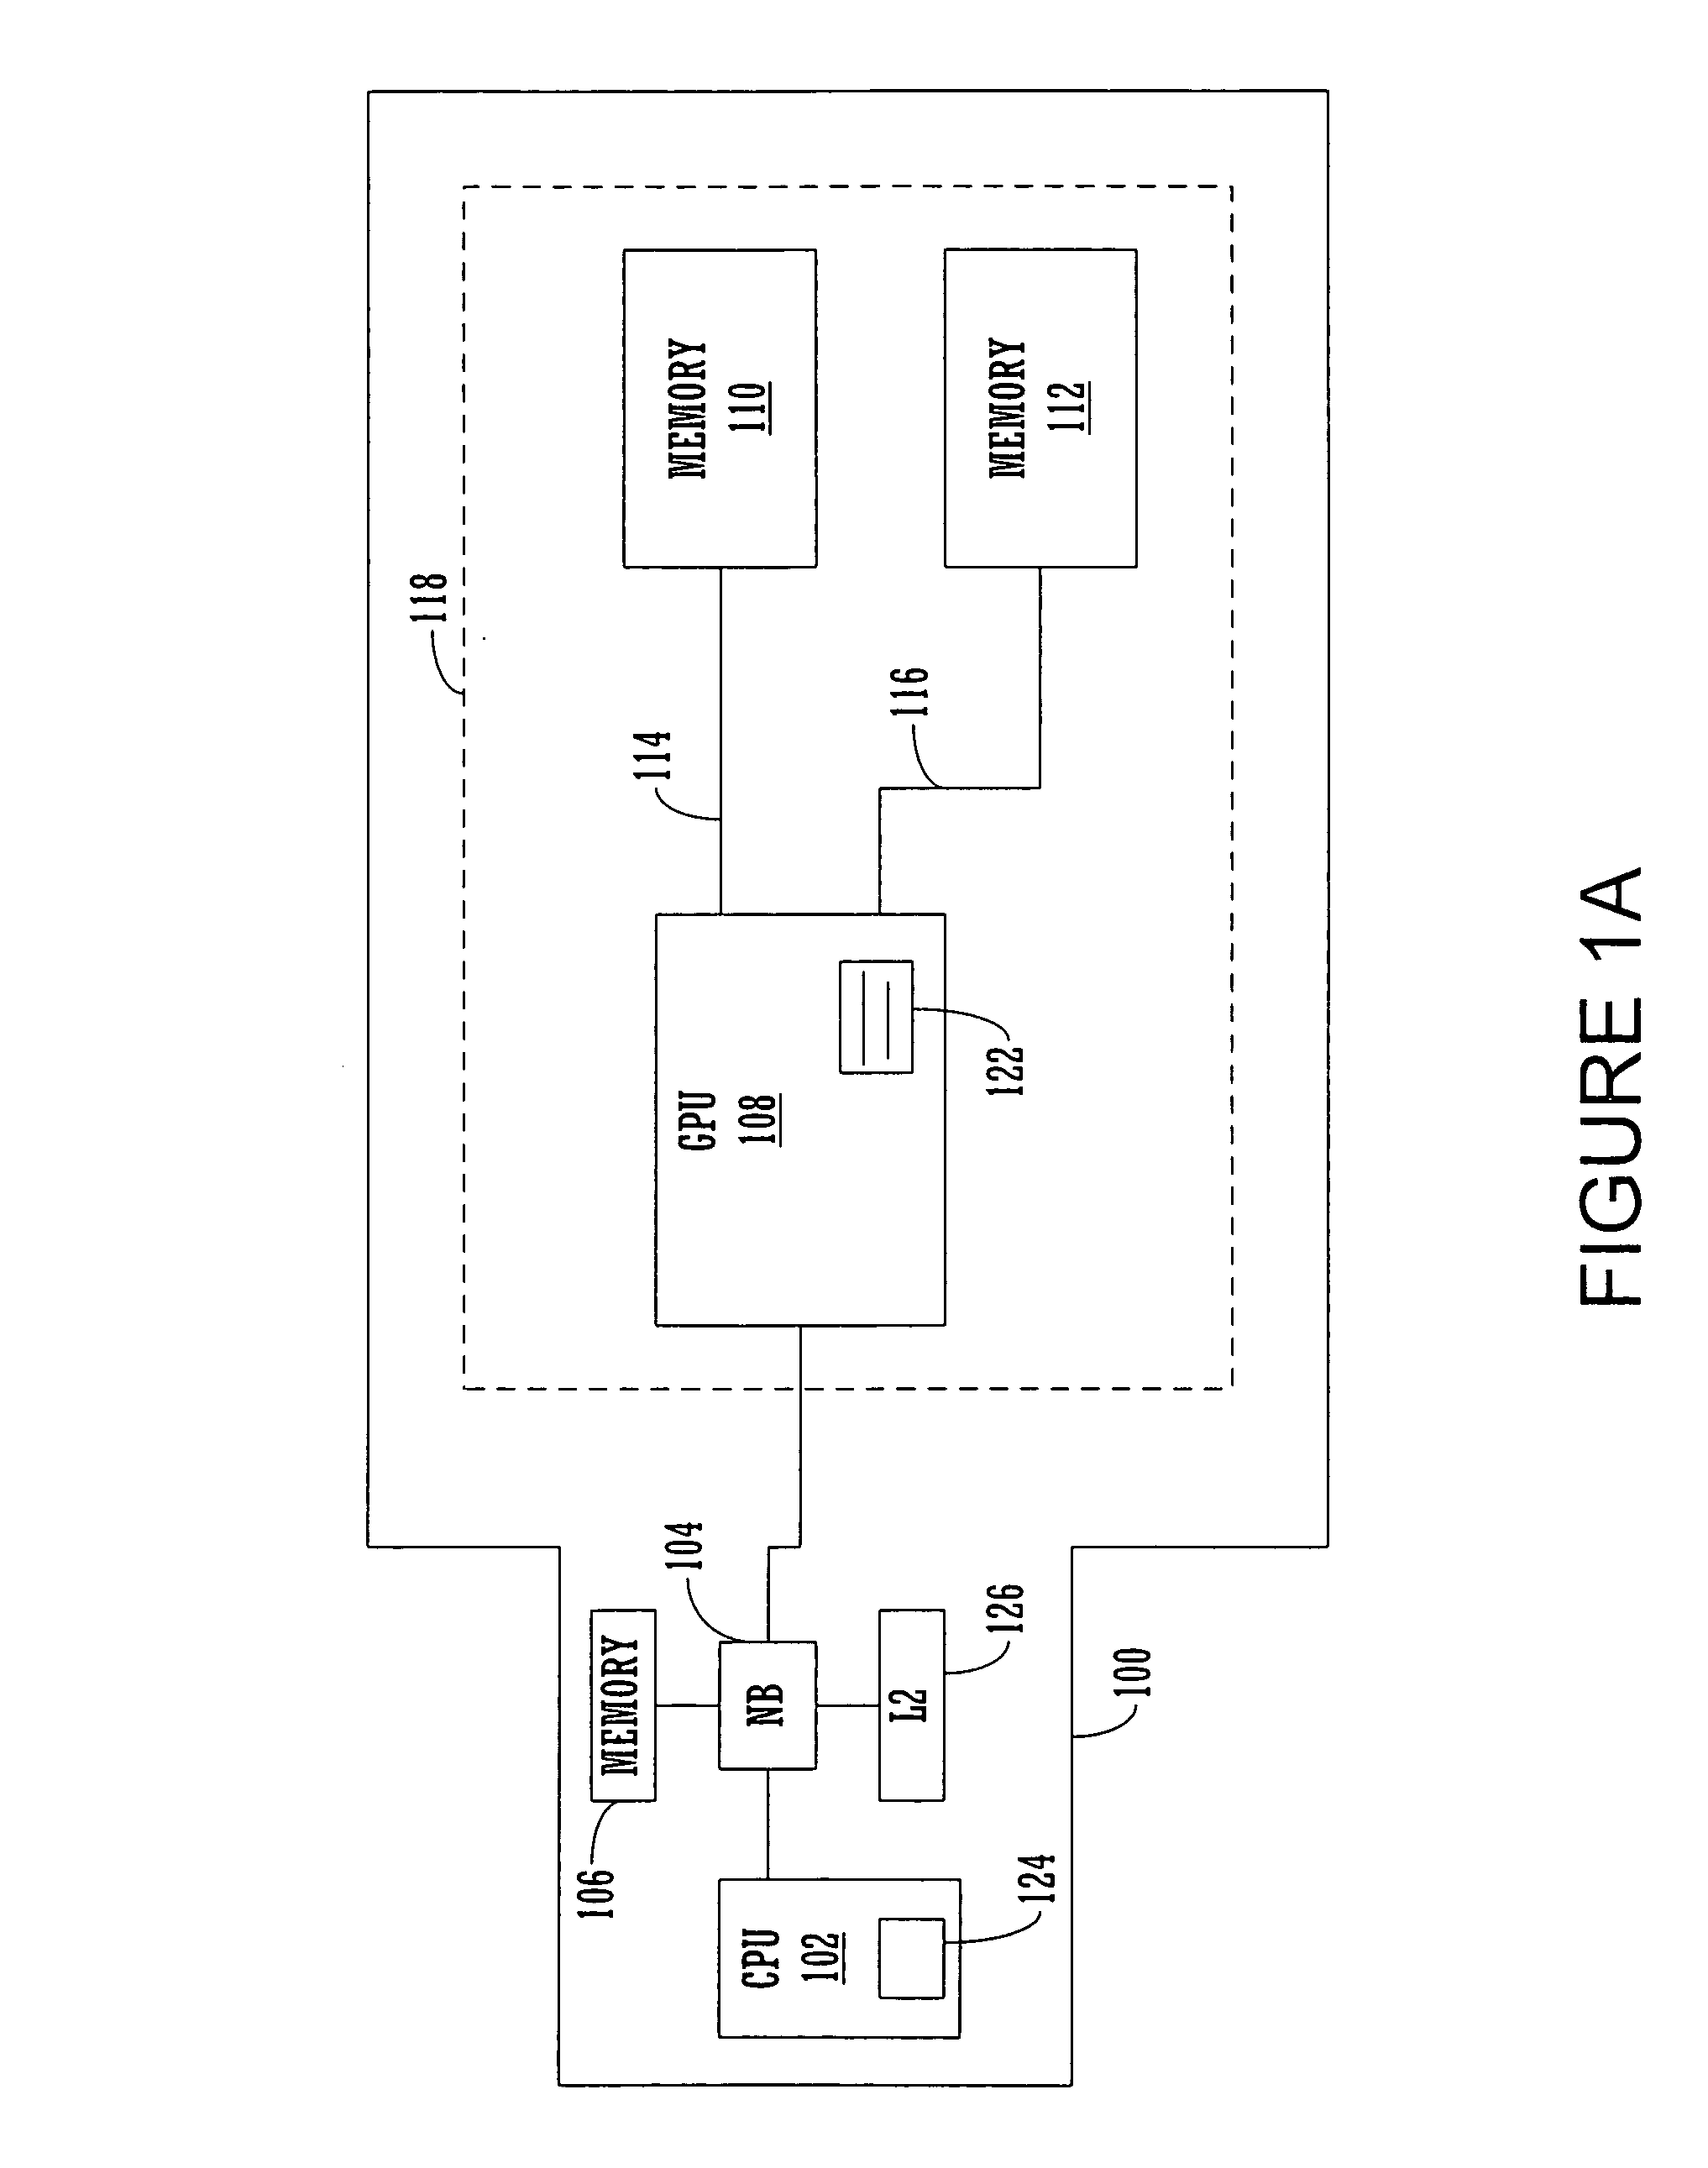 Method and apparatus for partial memory power shutoff